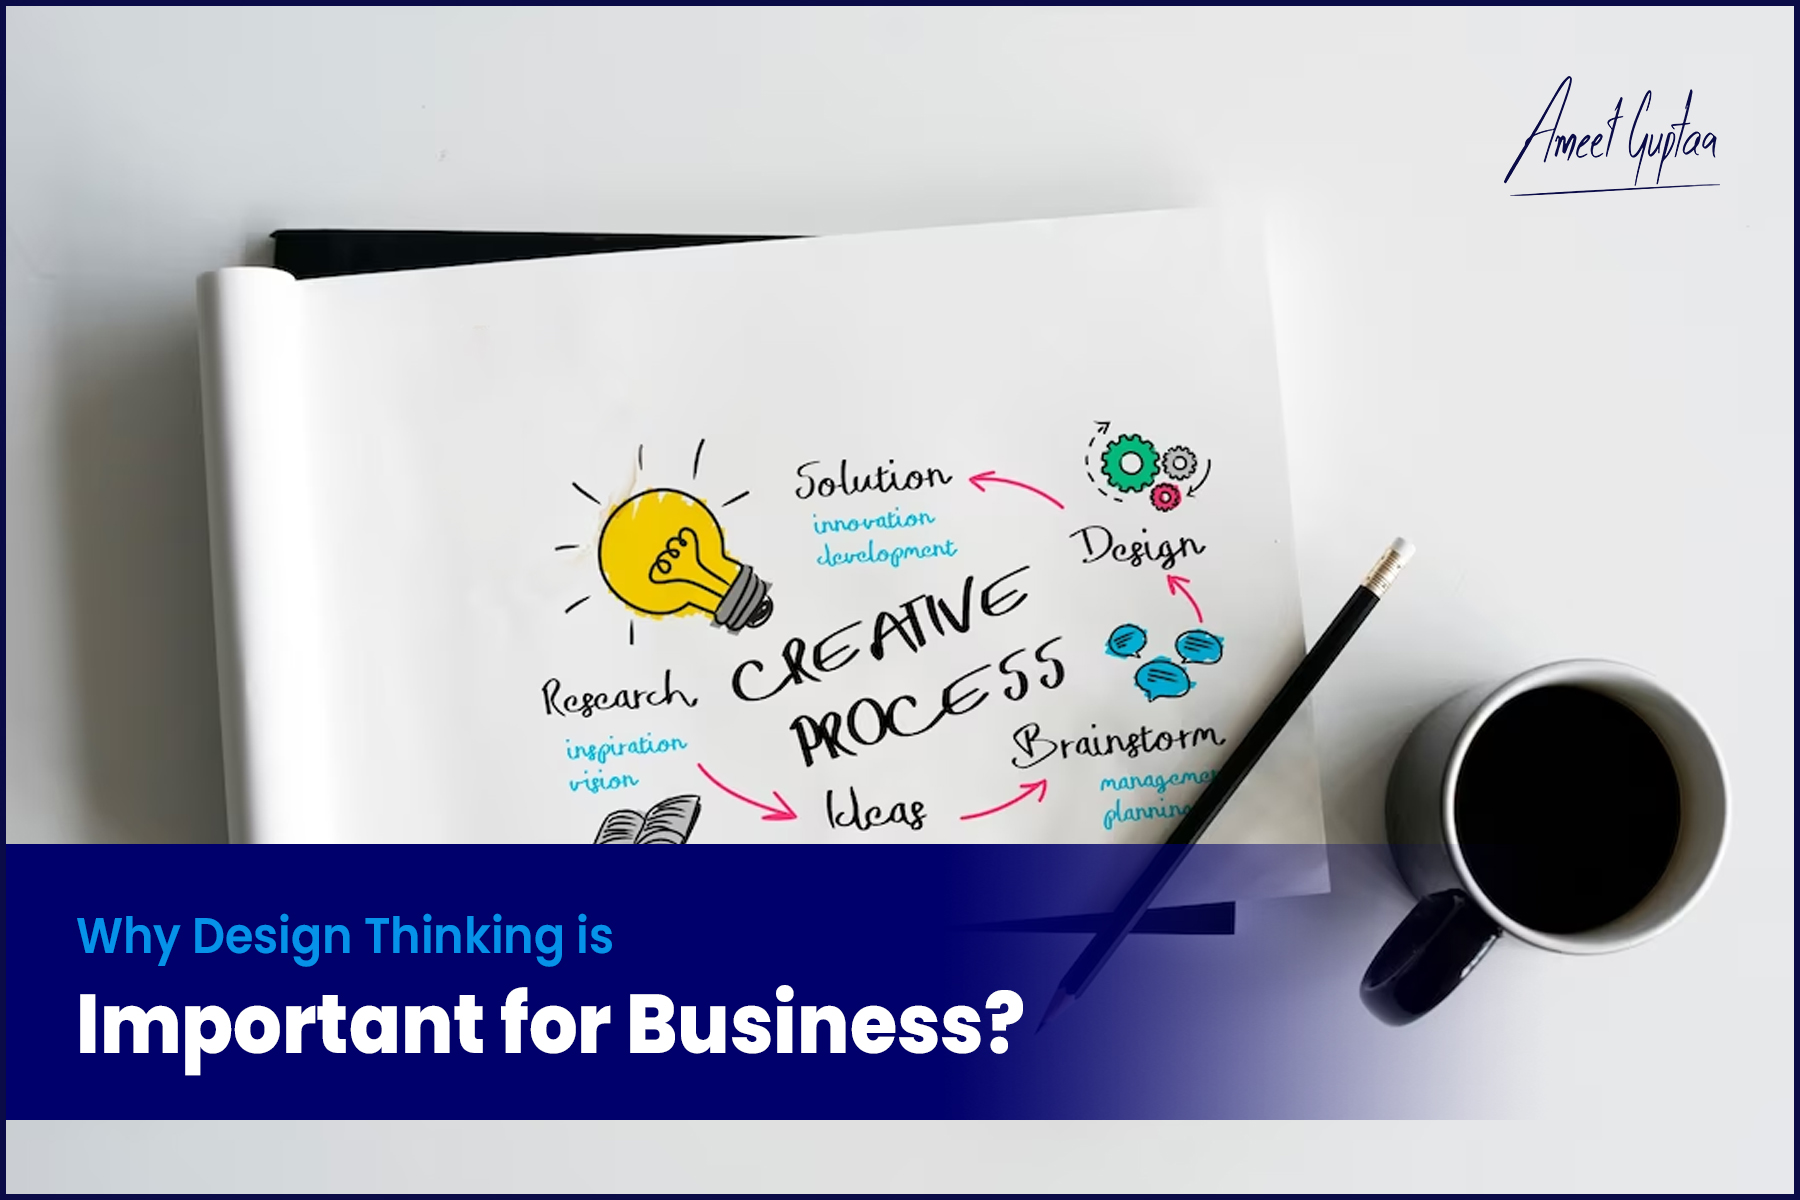 Why-Design-Thinking-is-Important-for-Business-Ameet-Guptaa